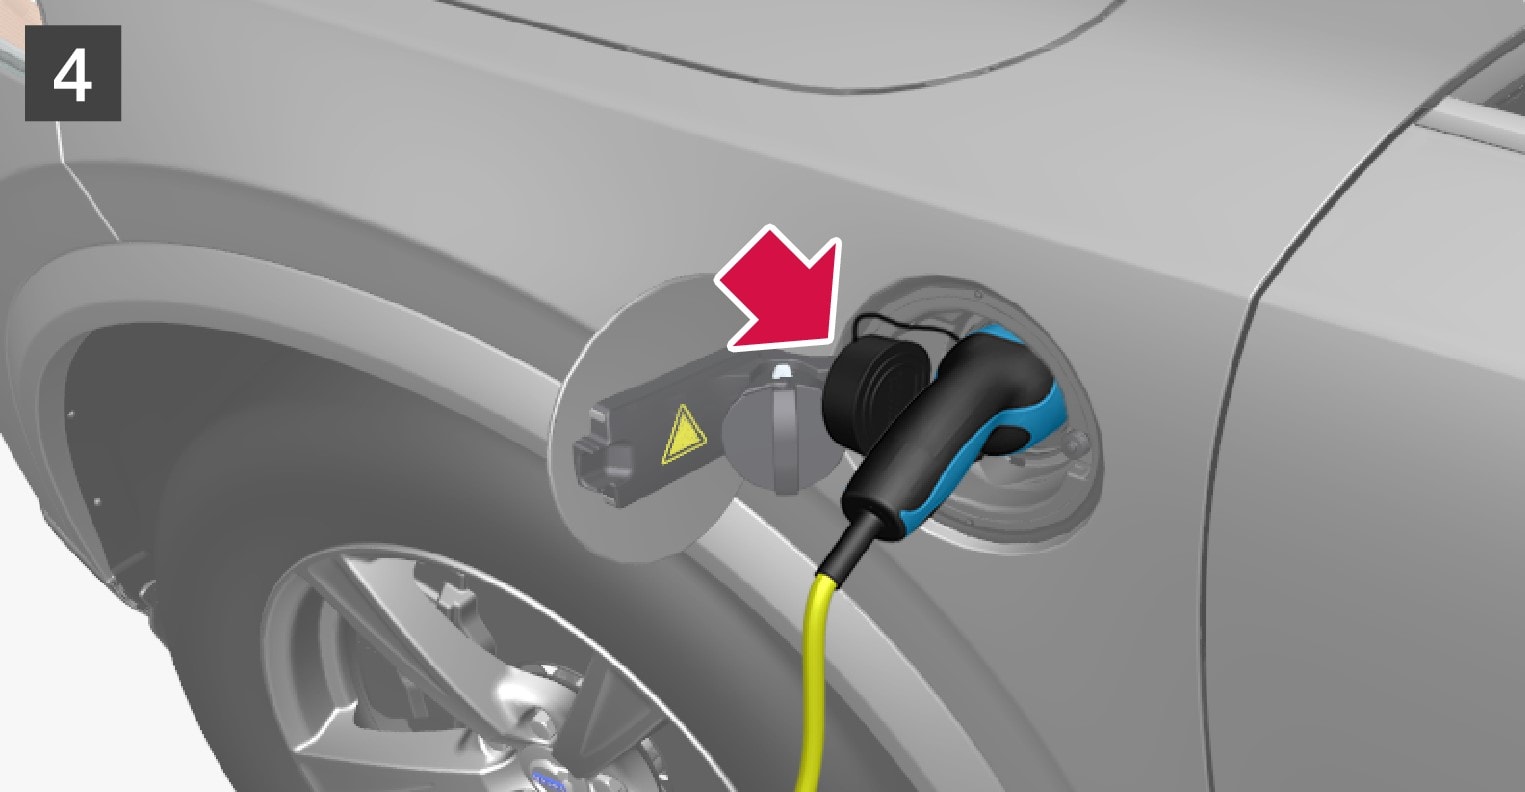 P5-1519-XC90 Hybrid-Adjustment of the charging cover